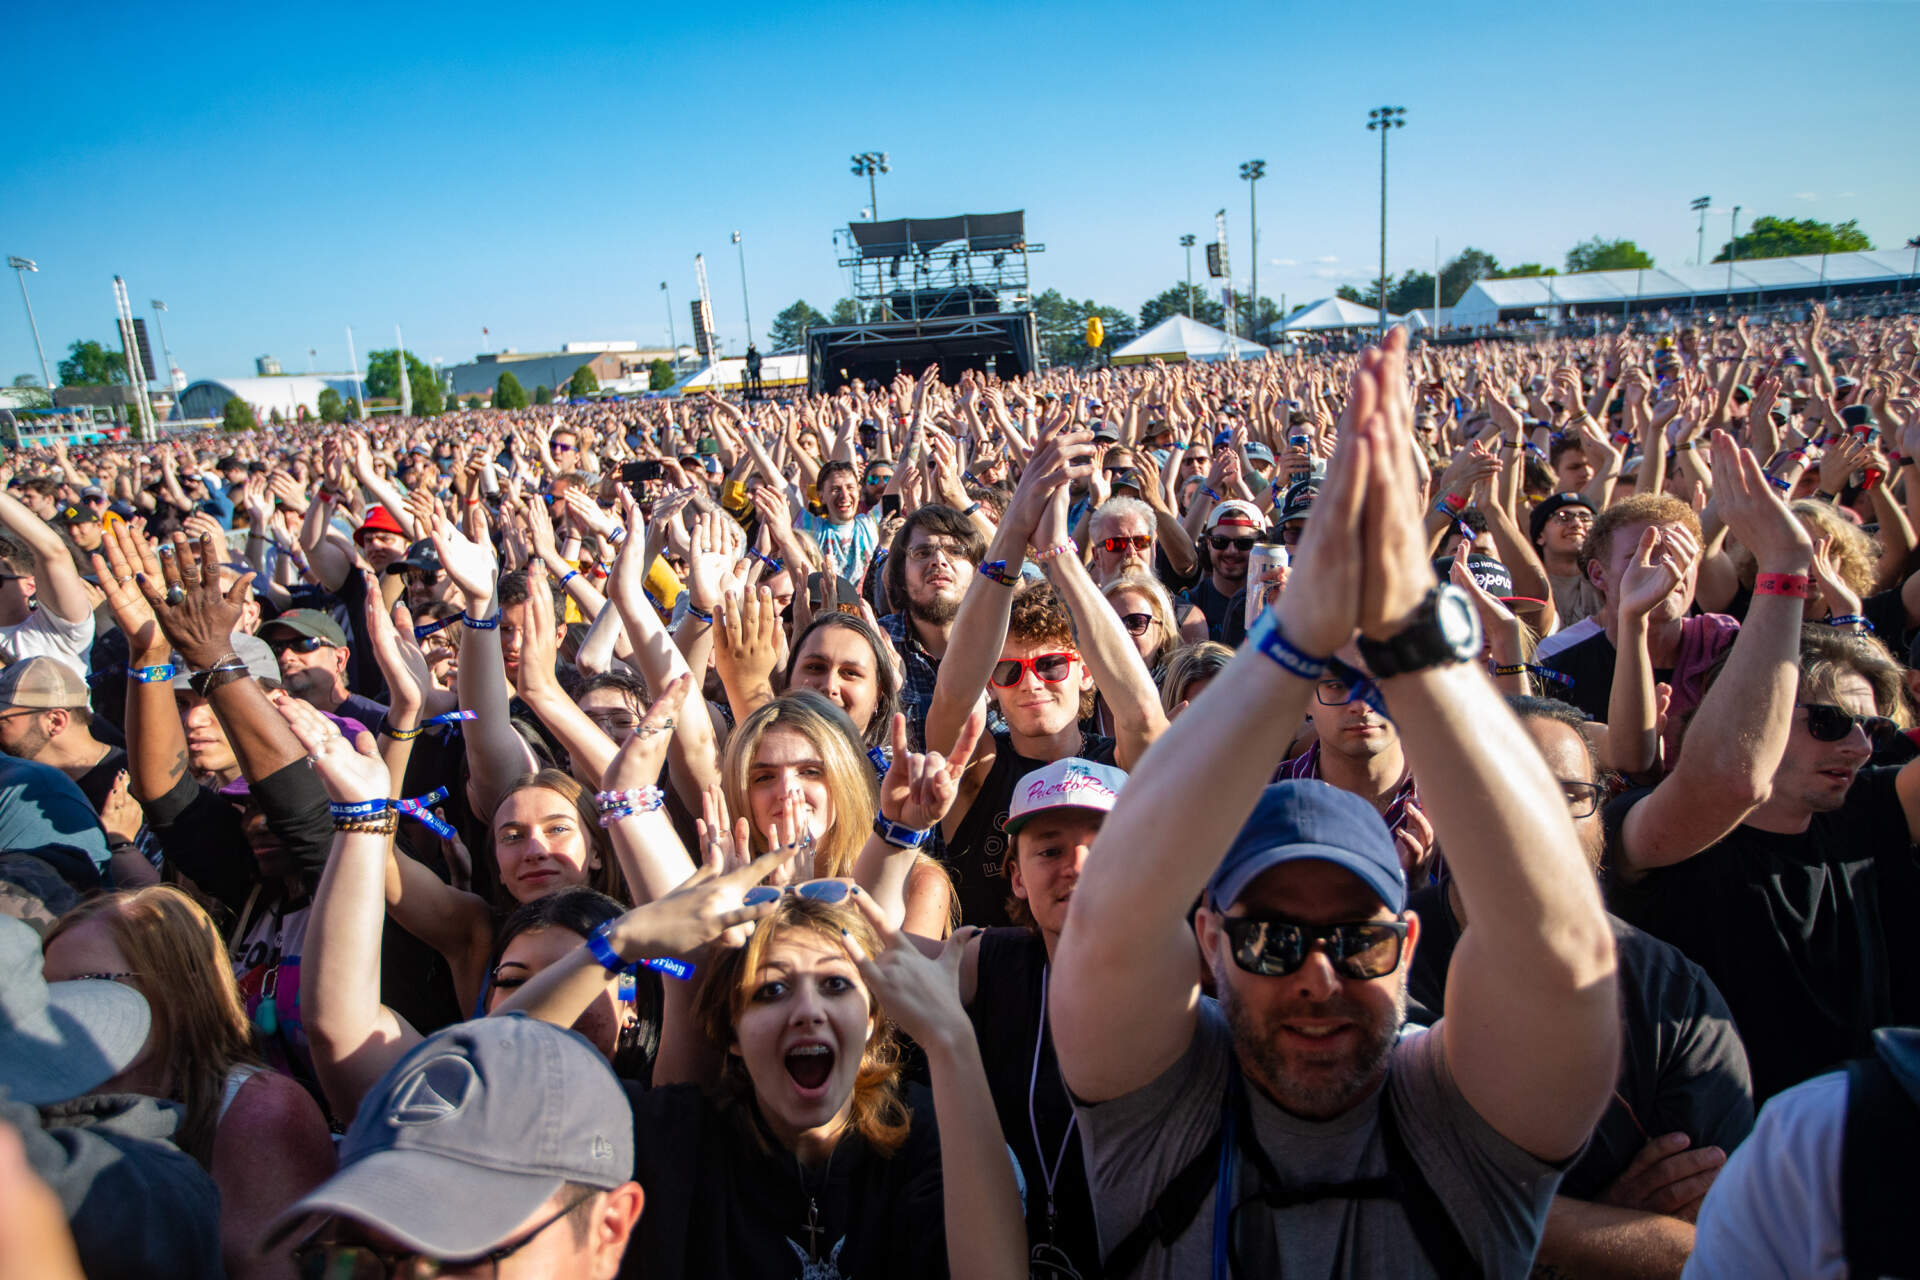 The audience claps along while the Dropkick Murphys play their set at Boston Calling. (Jesse Costa/WBUR)